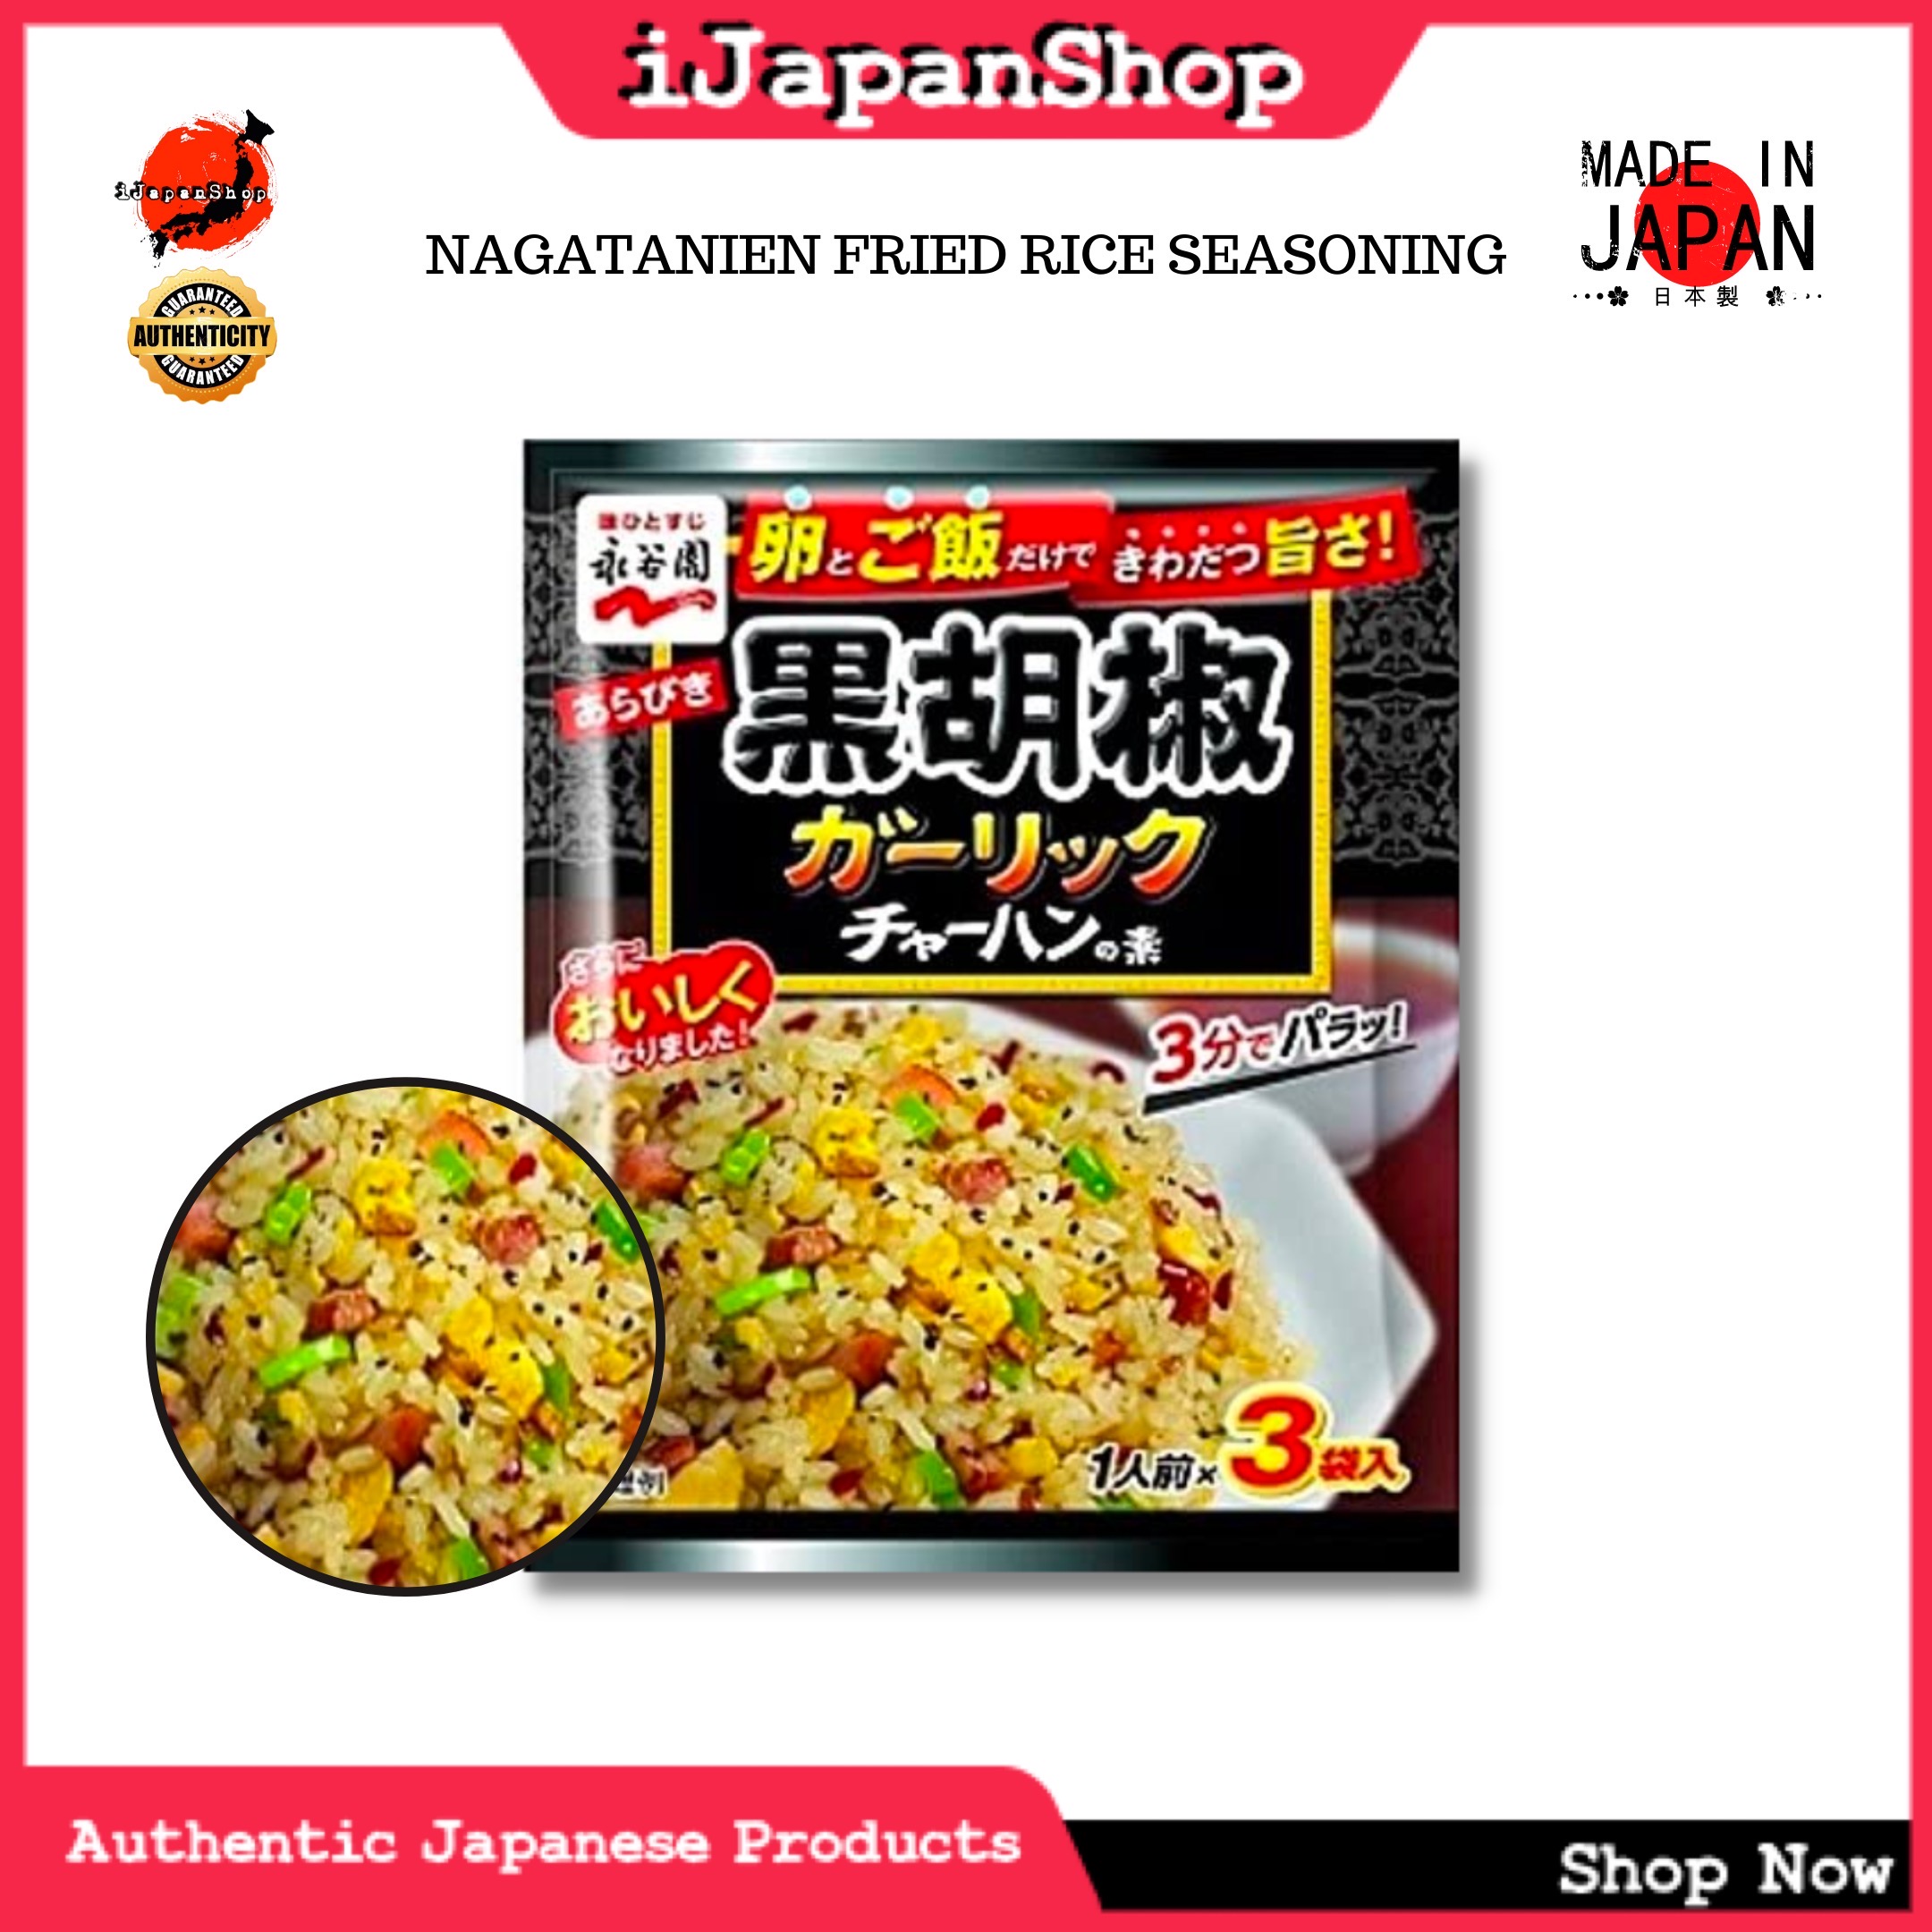 Japanese Fried Rice (Chāhan) with Instant Seasoning - RecipeTin Japan